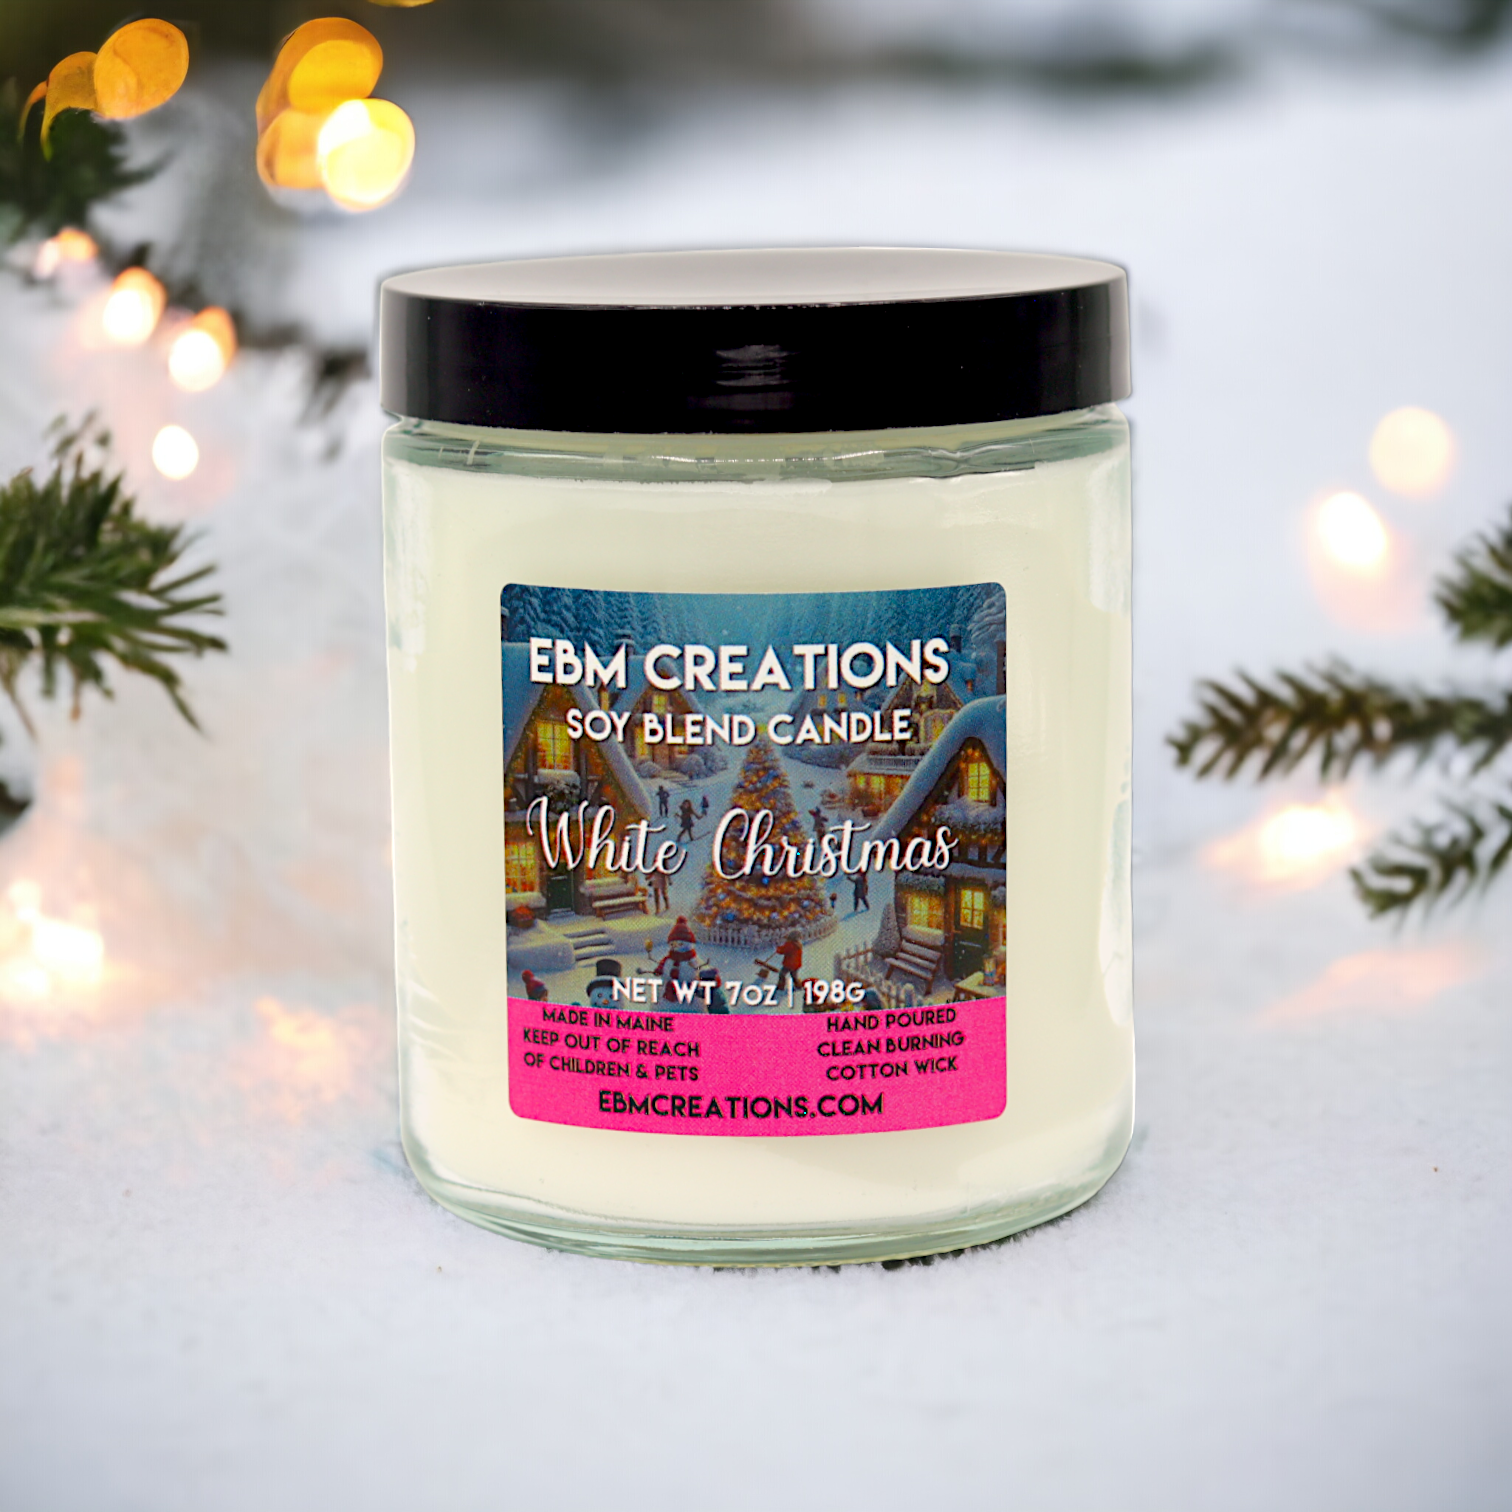 White Christmas - 7oz  Soy Blend Candle